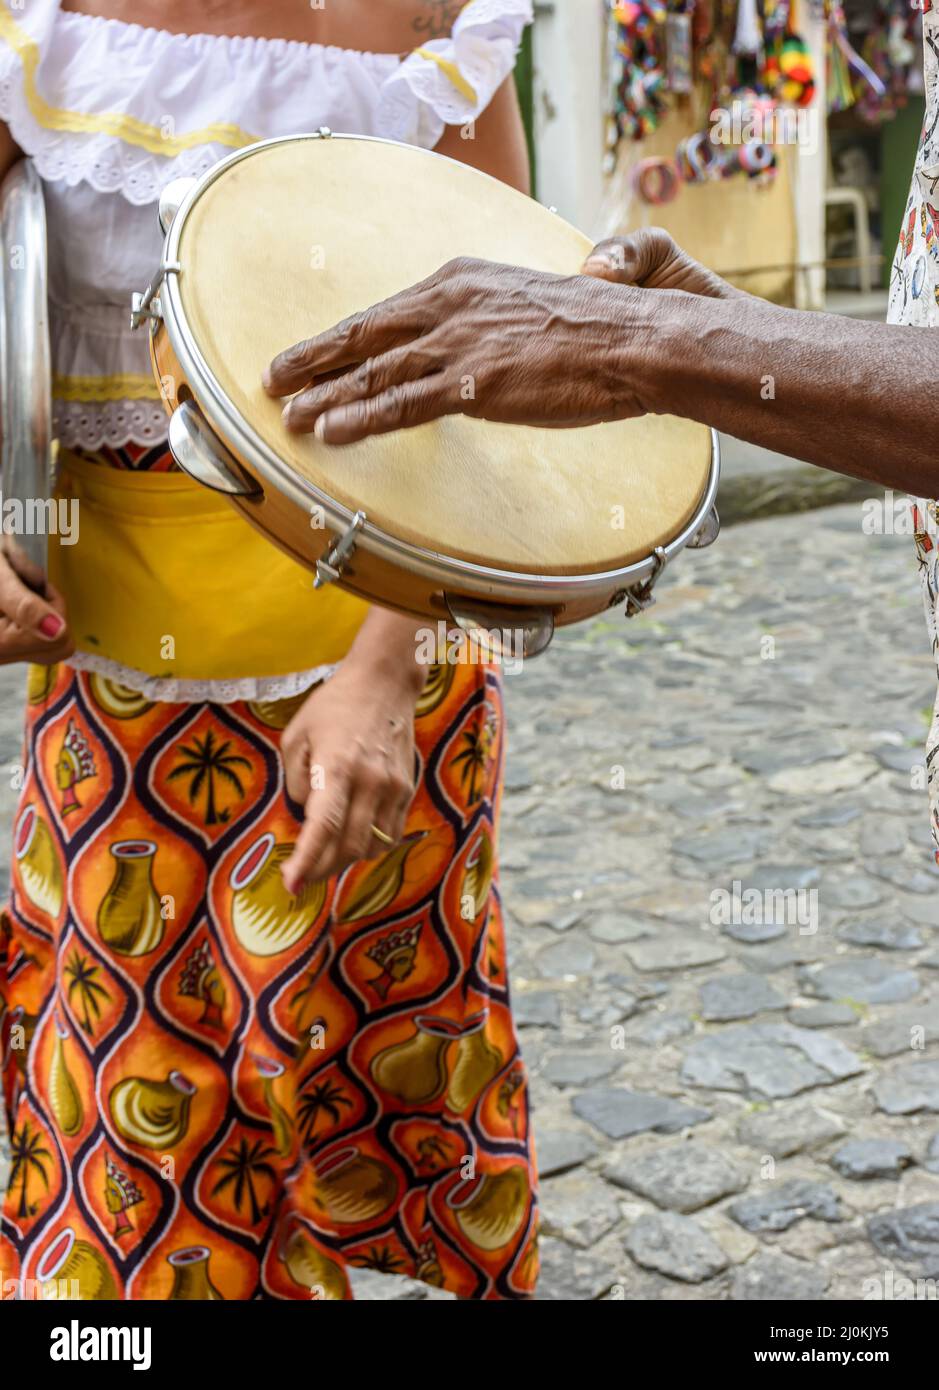 Tambourine player with a woman in typical clothes dancing in the background Stock Photo